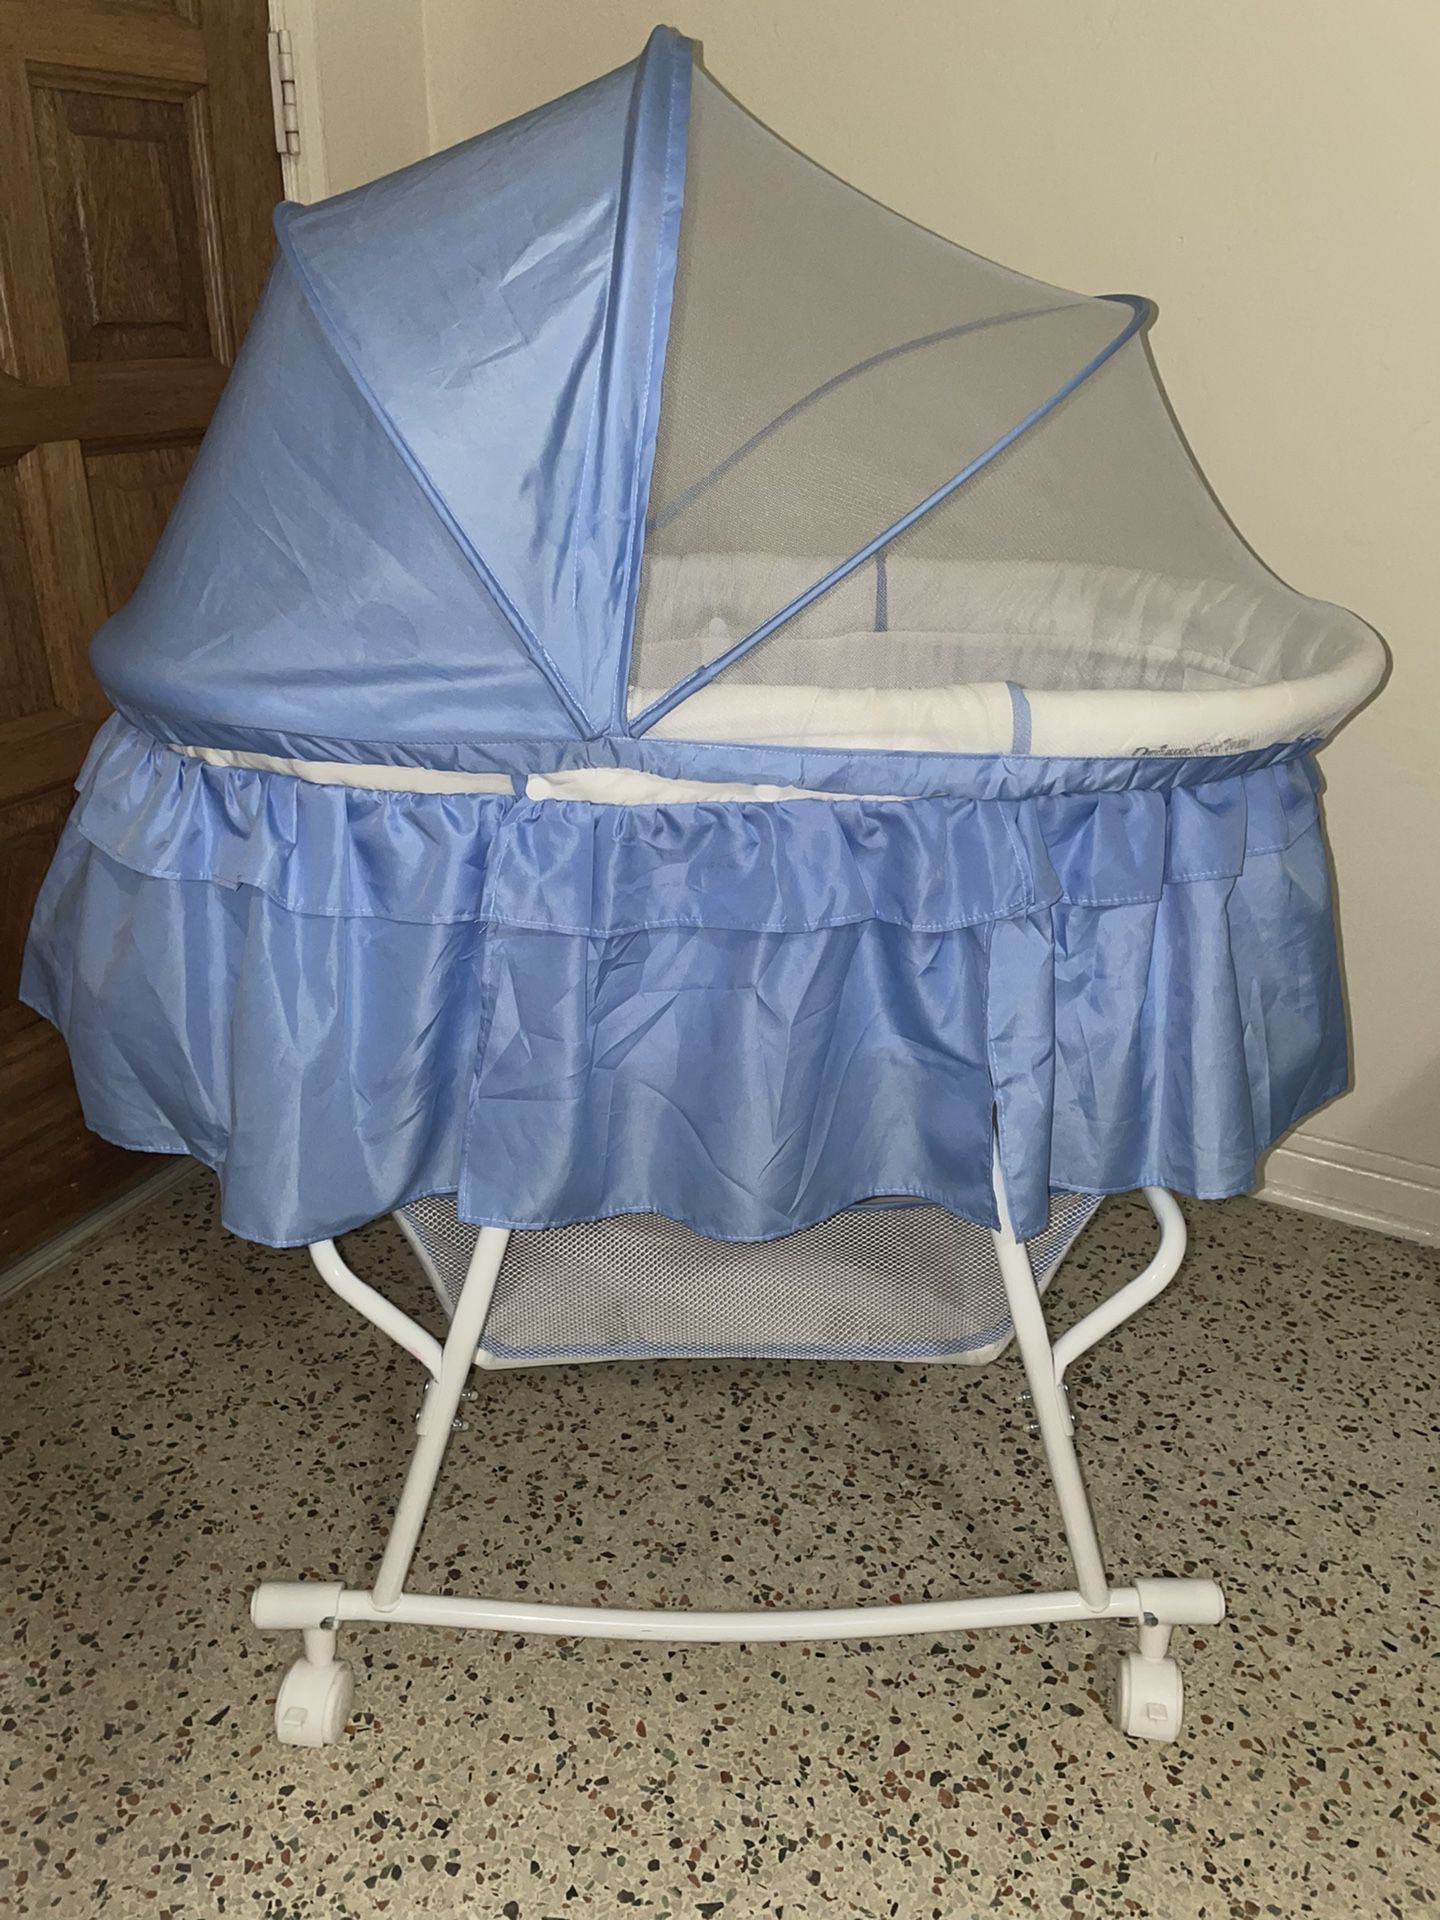 Bassinet For Baby Bedside Sleeper With Wheels Cuna Para Bebe 